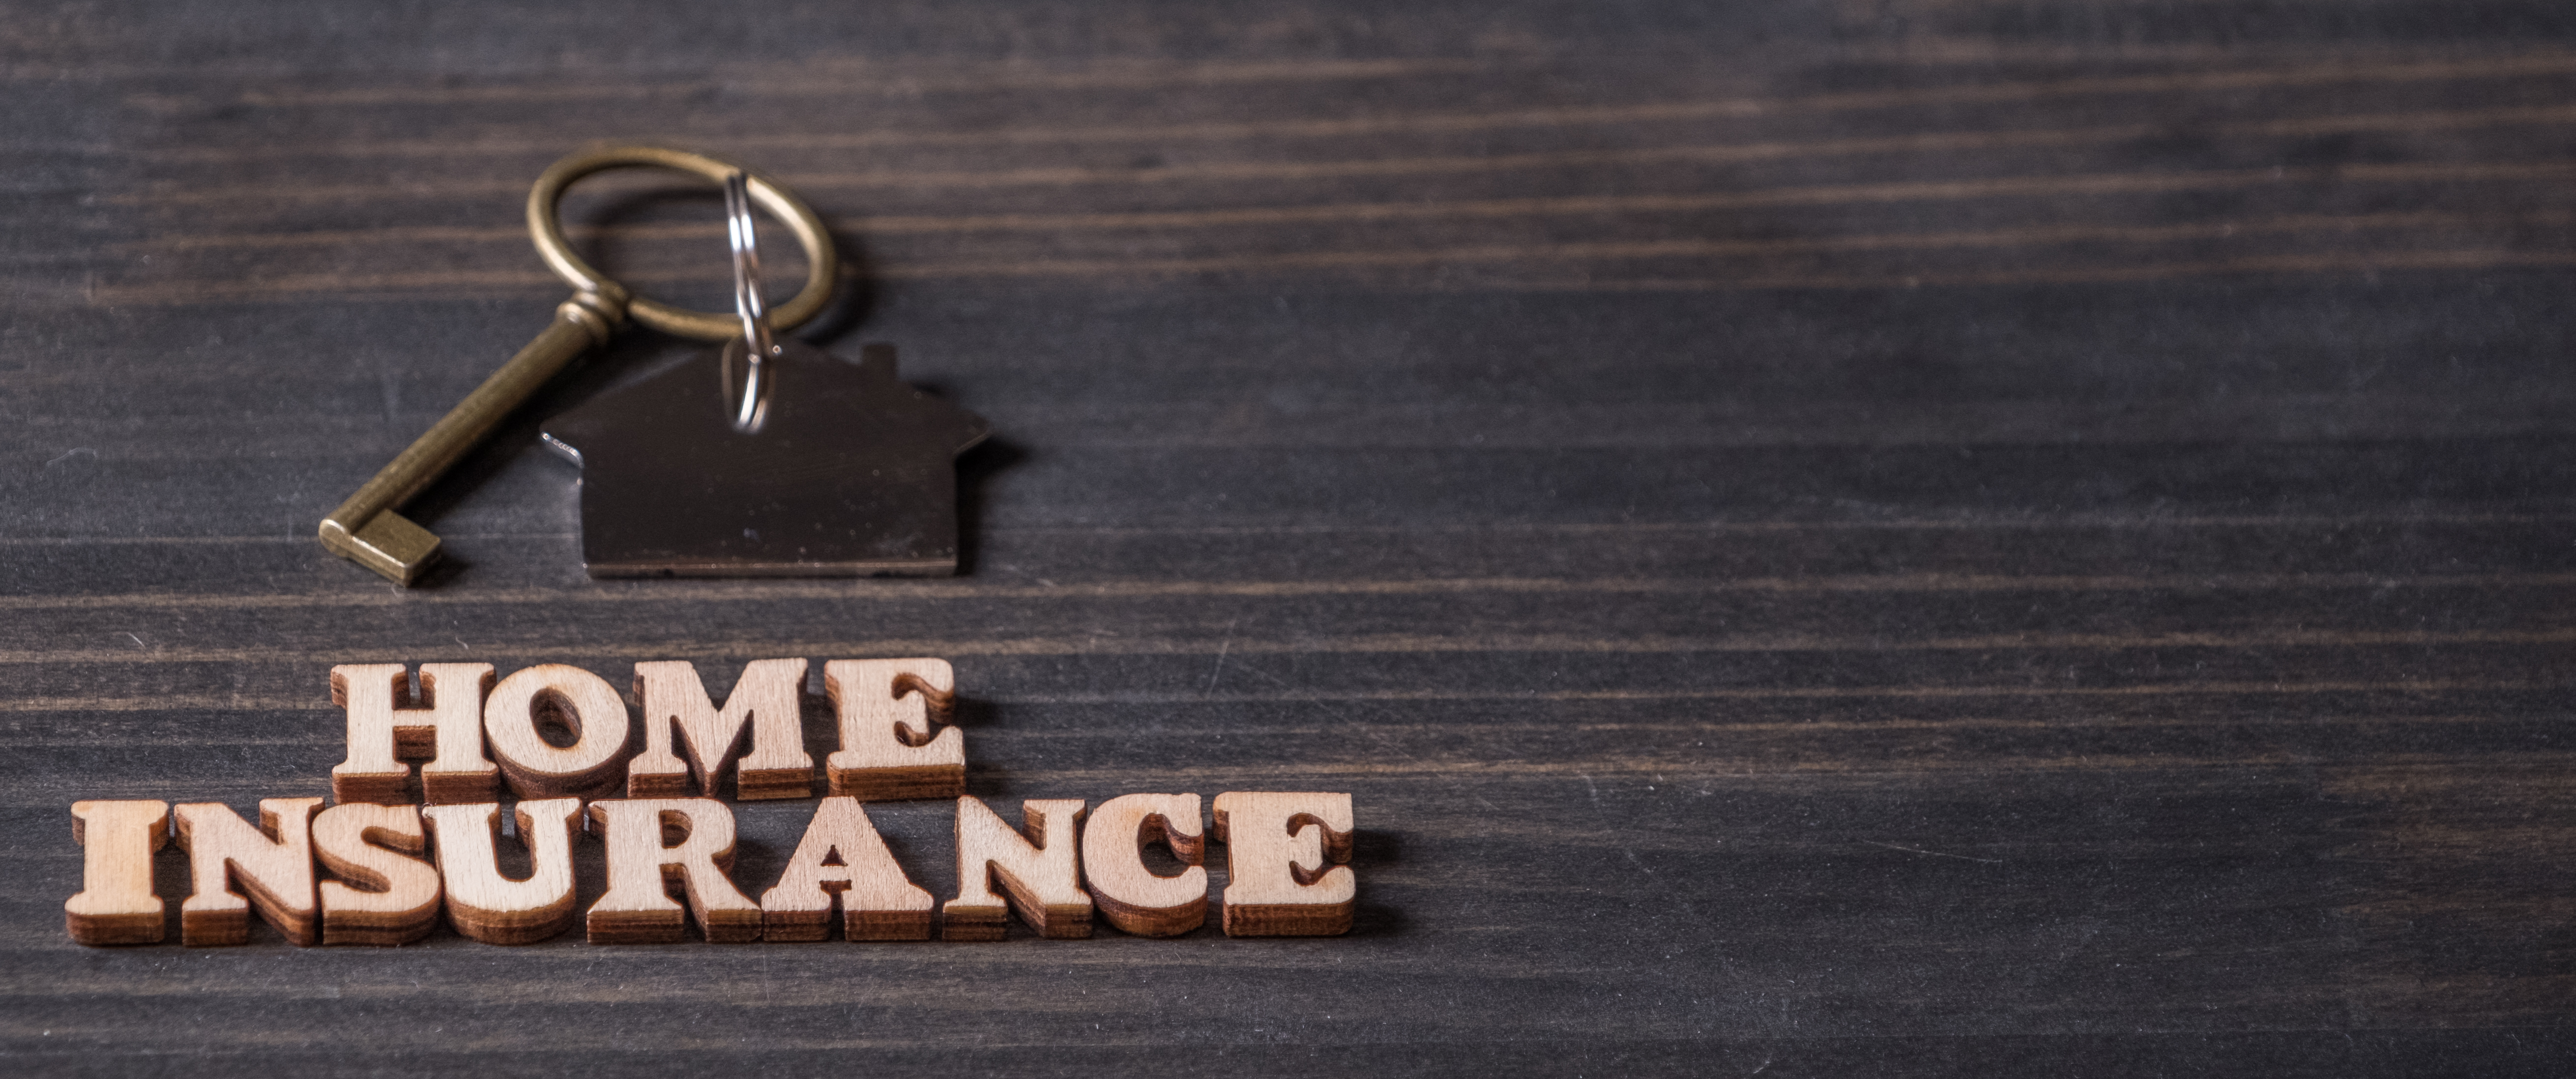 A key chain opening the door to home insurance companies